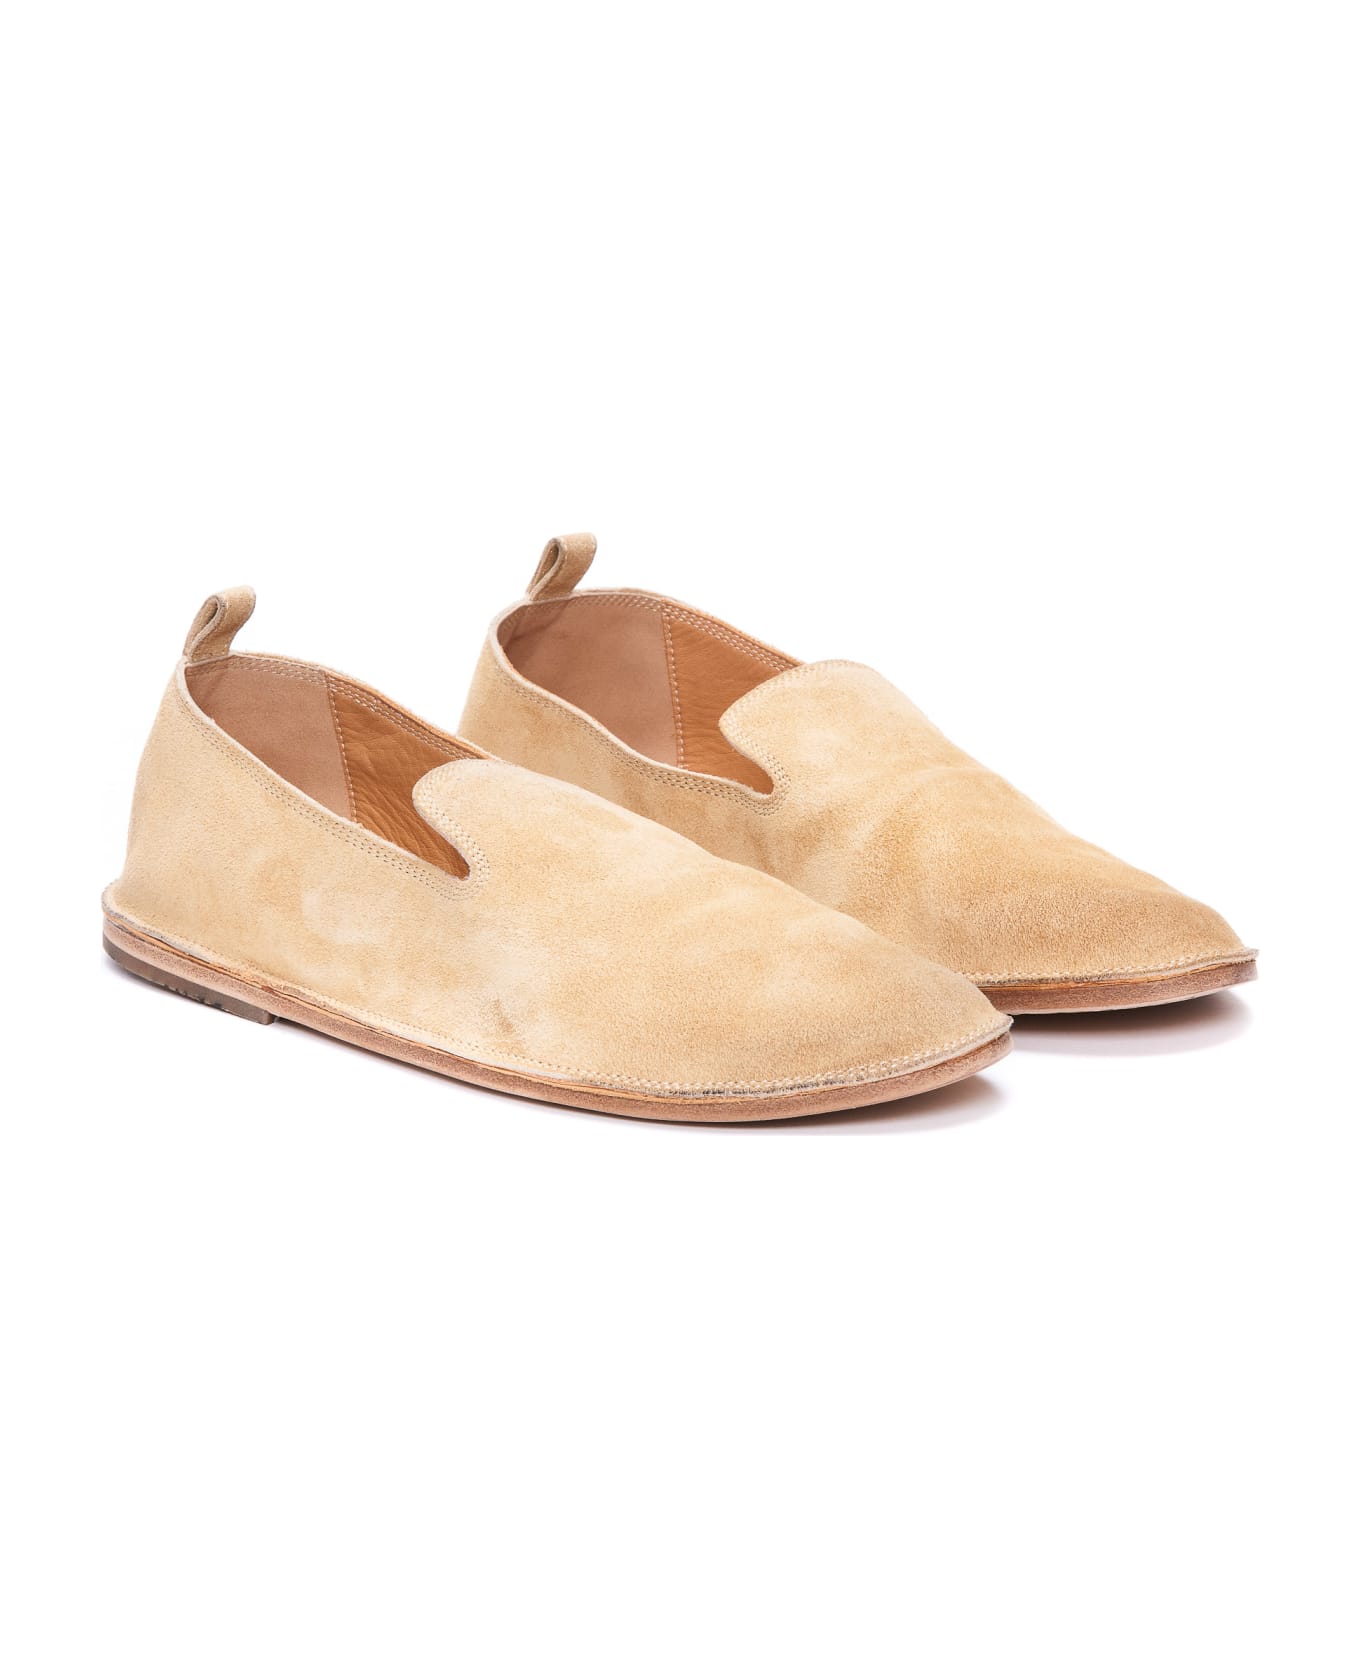 Marsell Strasacco Loafers - Beige